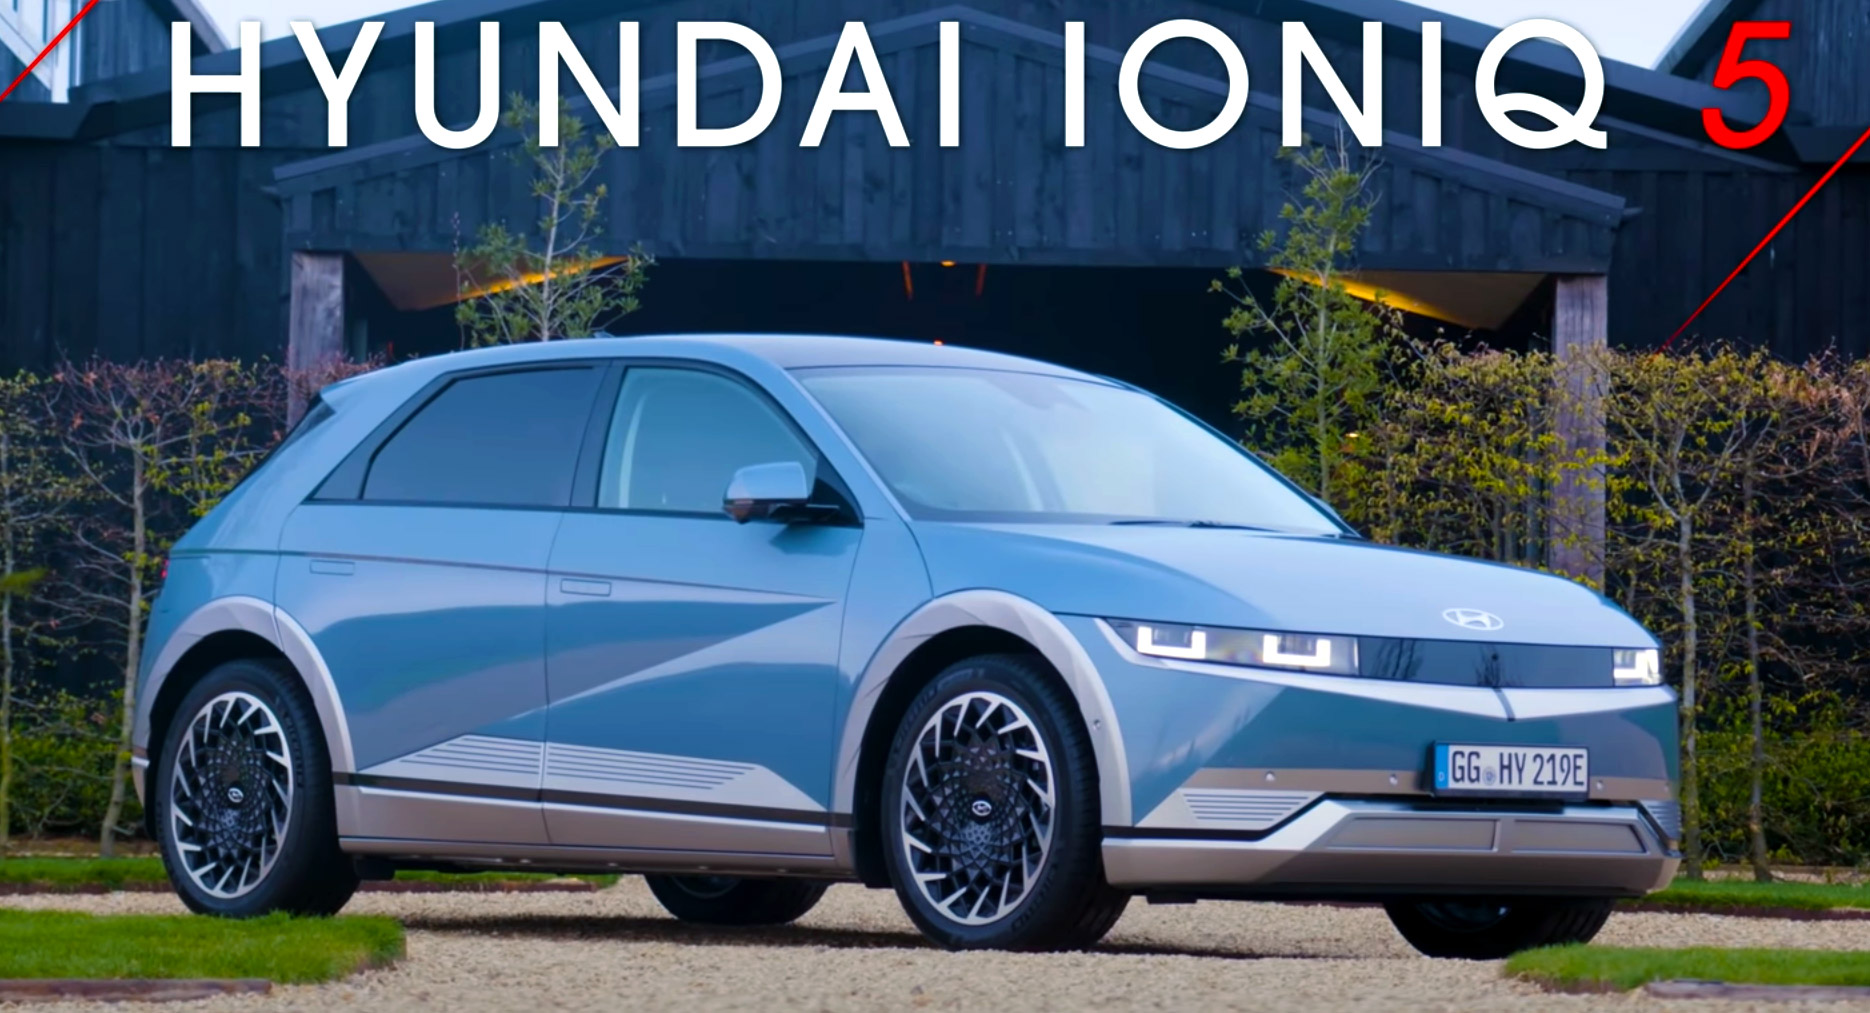 Early Reviews Of Hyundai’s Ioniq 5 EV Are In And They’re Good